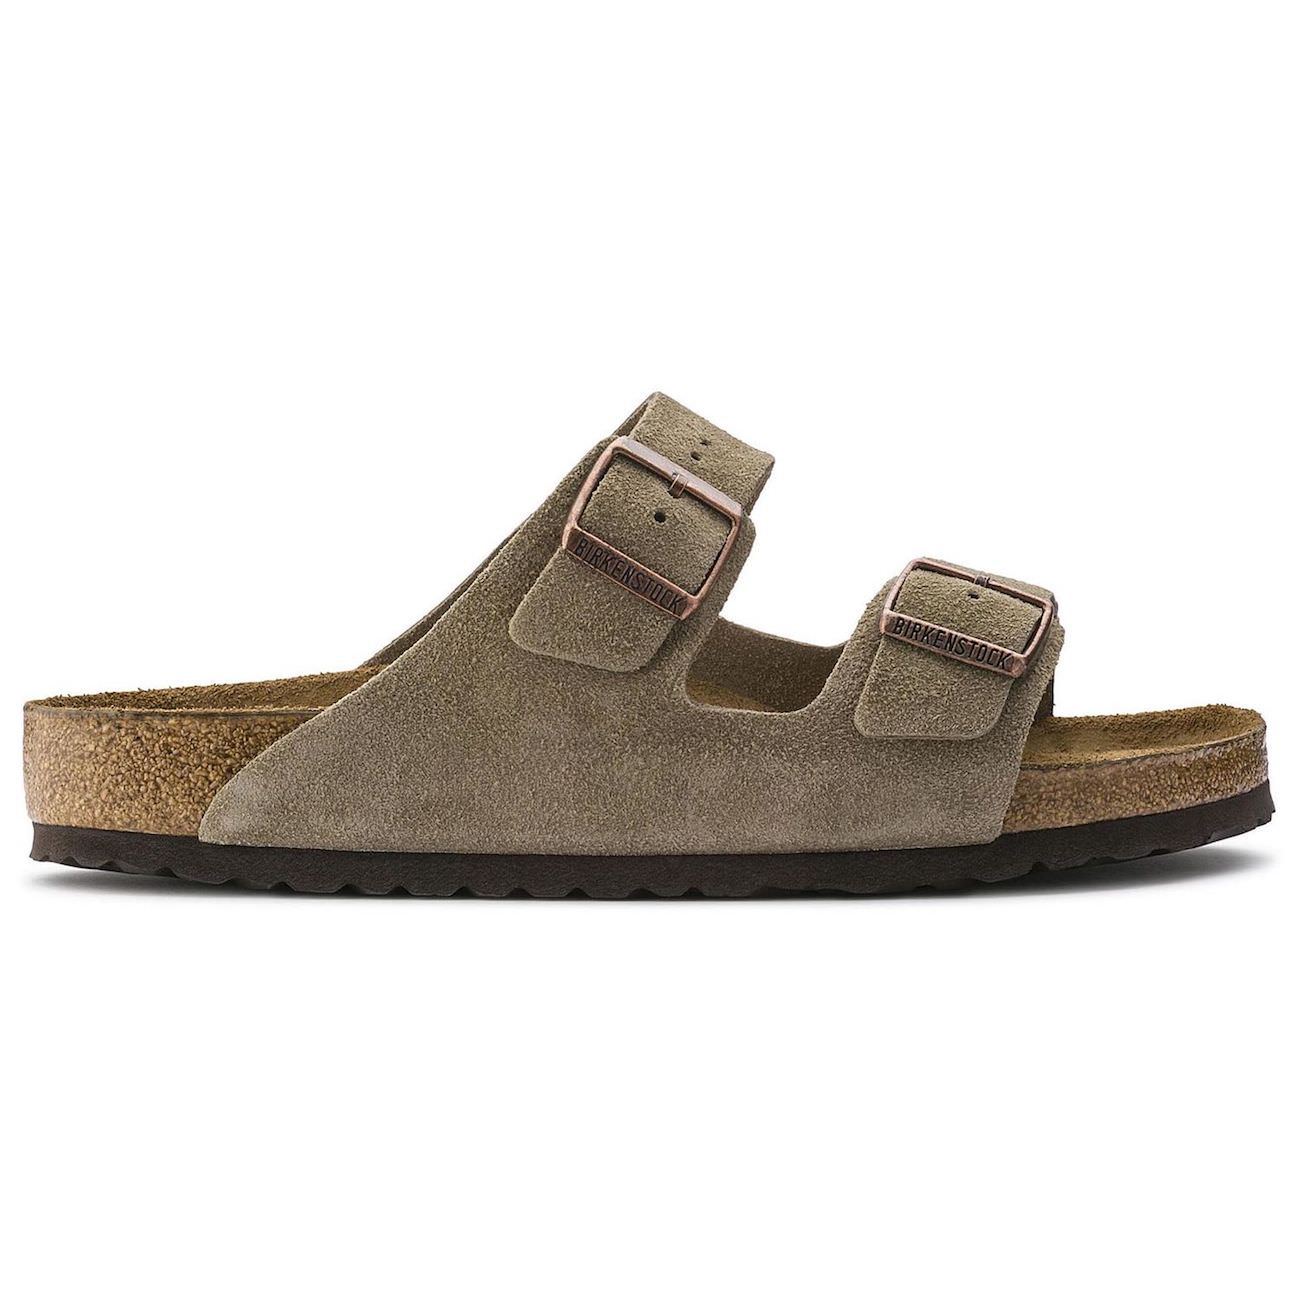 Birkenstock Classic, Arizona, Soft Footbed, Suede Leather, Narrow Fit, Taupe Sandals Birkenstock Classic Taupe 35 